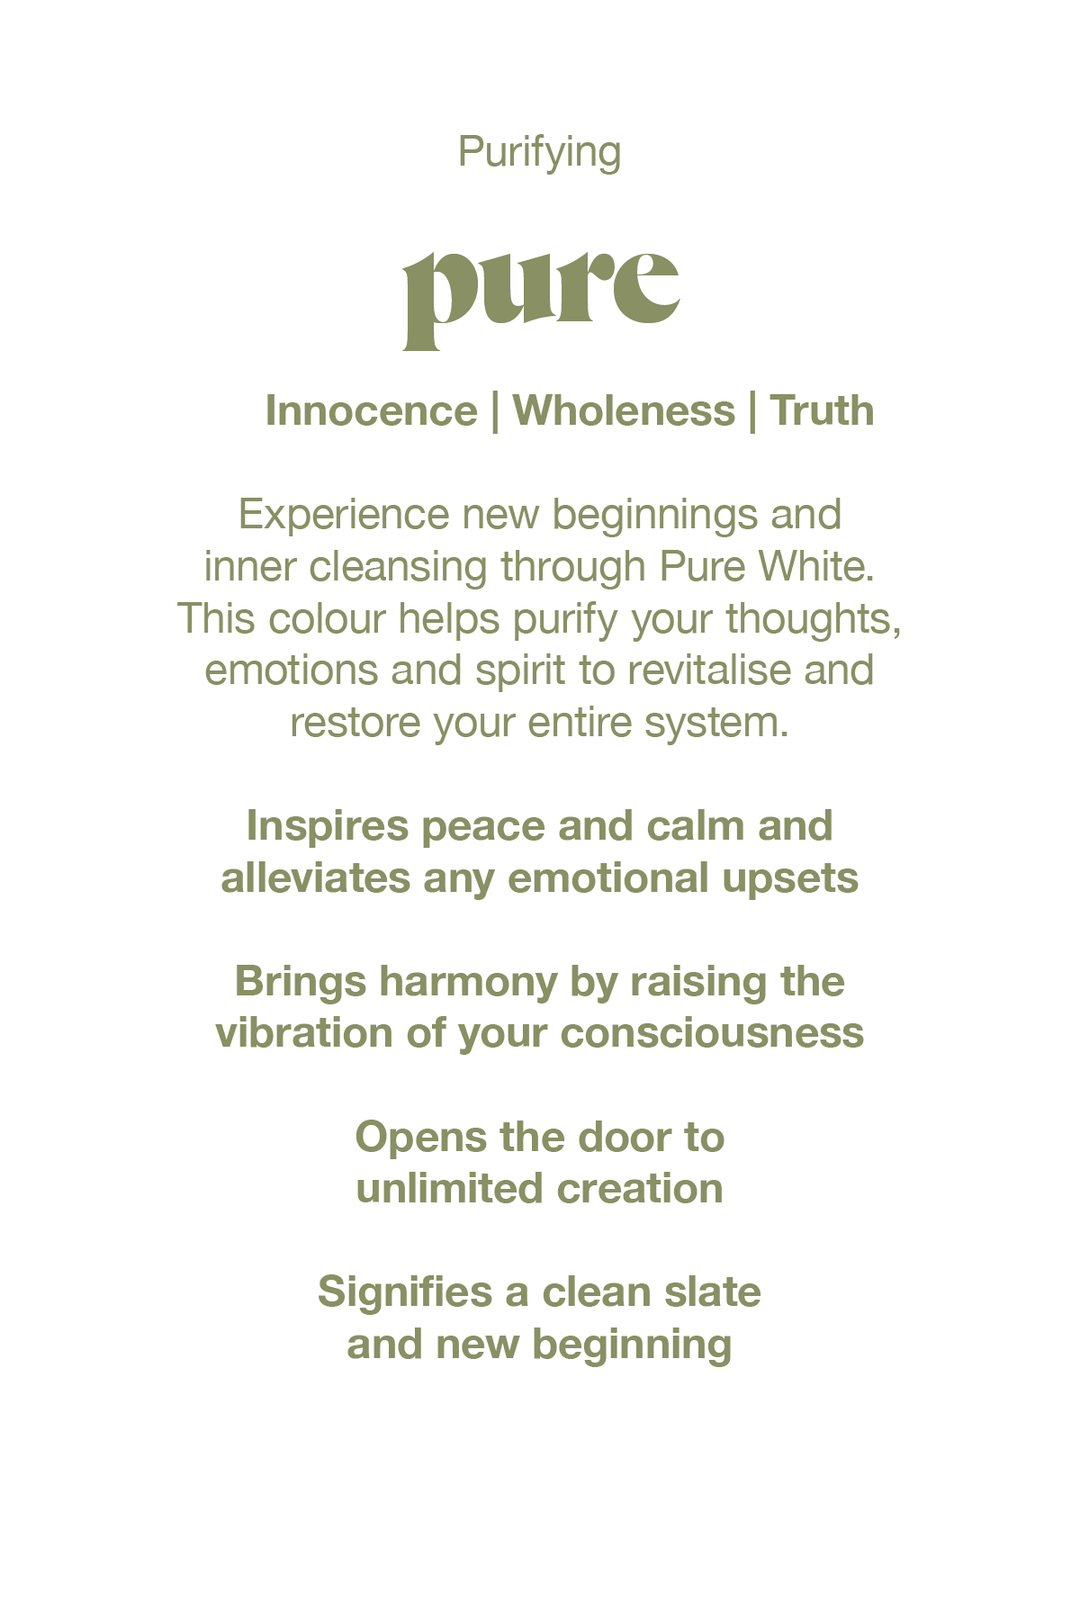 Experience new beginnings and inner cleansing through Pure white.  This colour helps purify your thoughts, emotions and spirit to revitilise and restore your whole system.